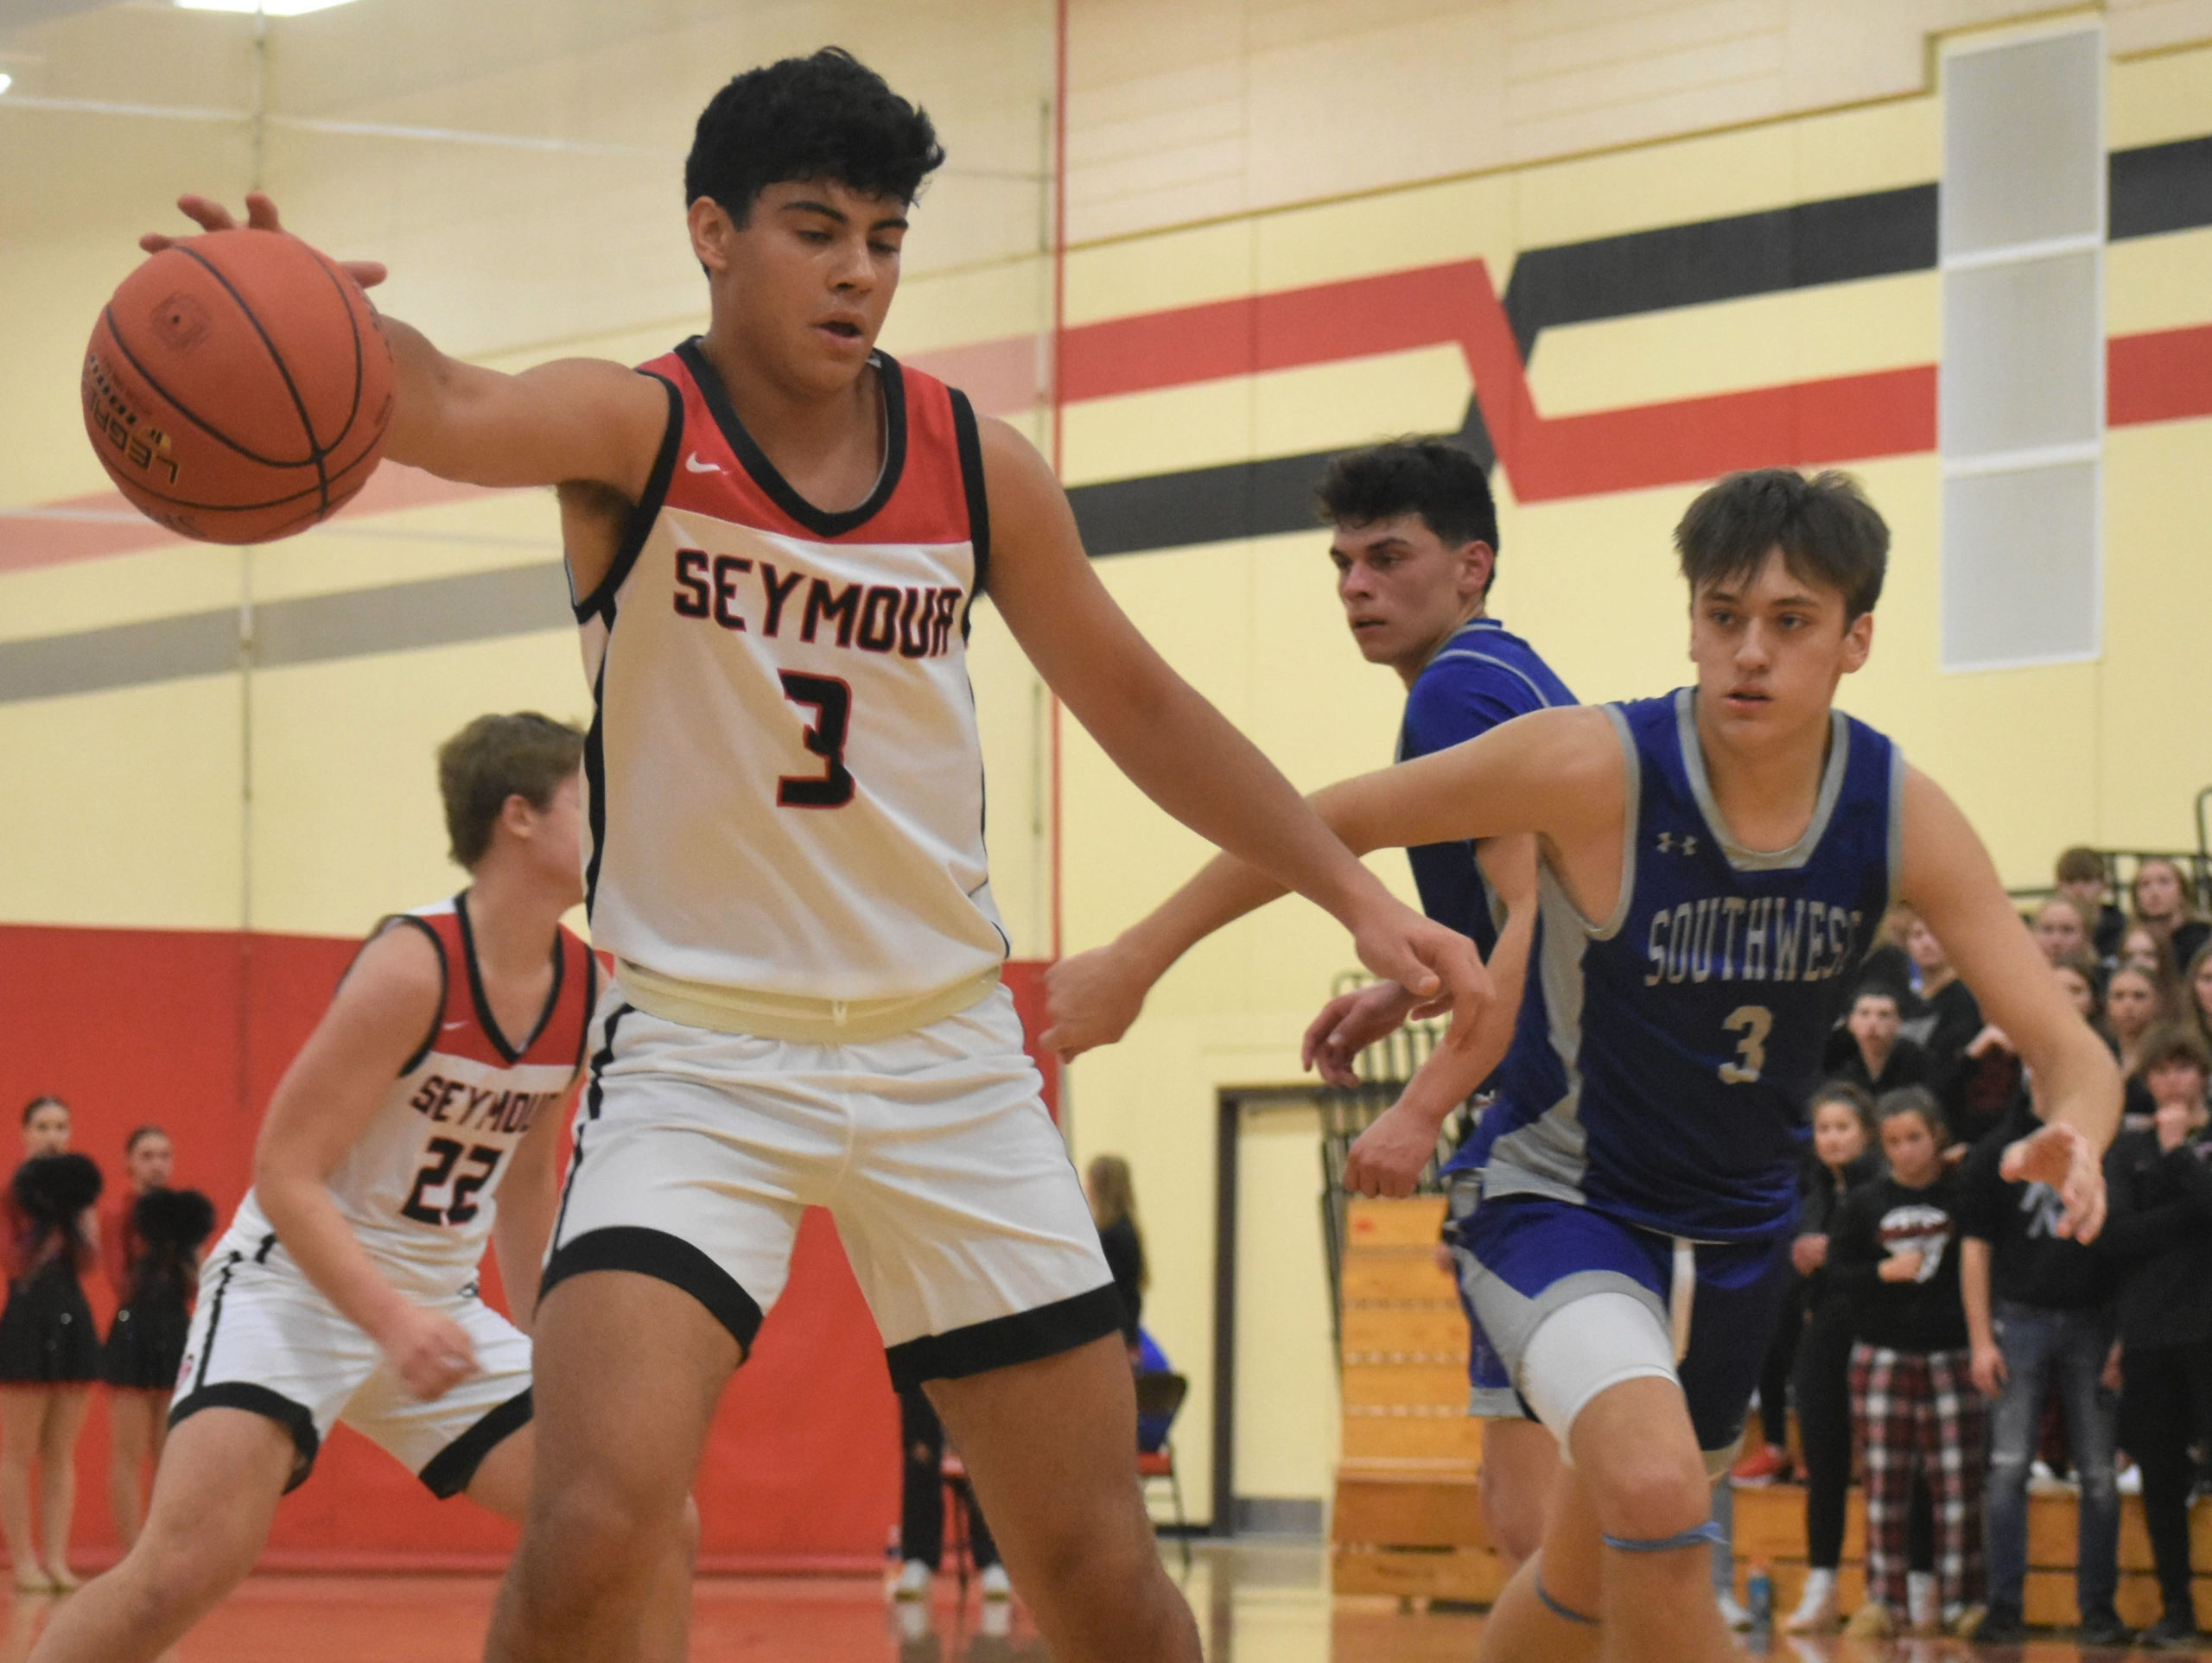 Seymour holds off late surge by Southwest